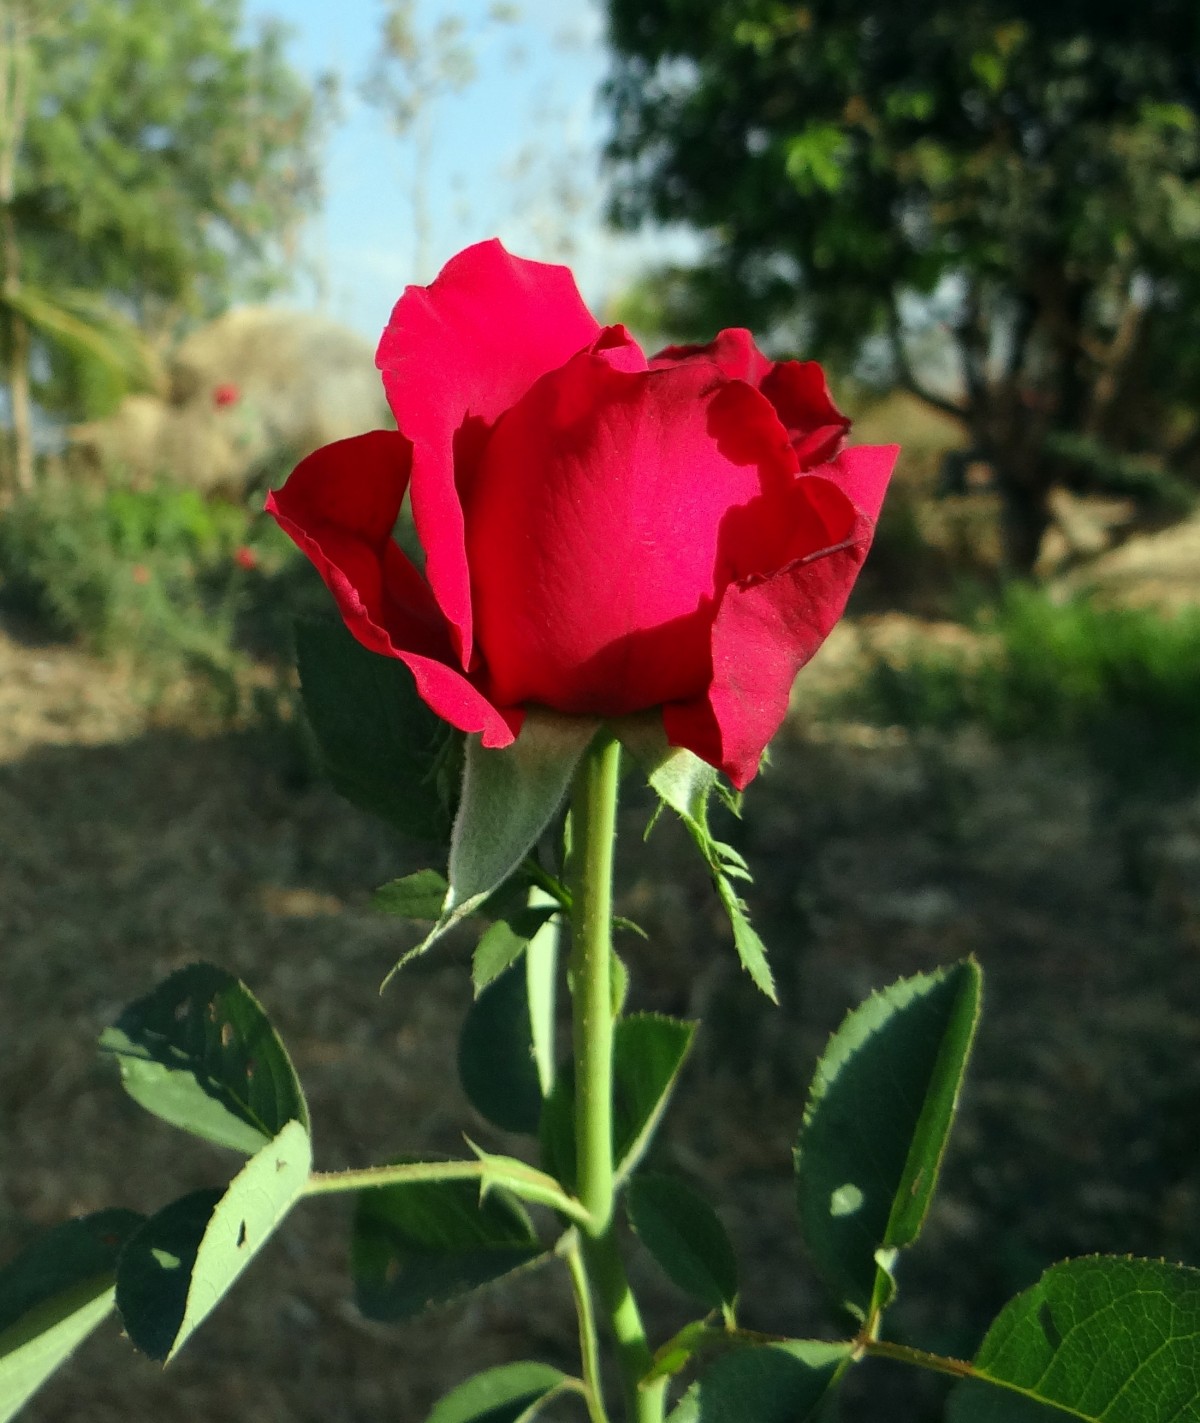 6 Easy Steps for Growing Roses